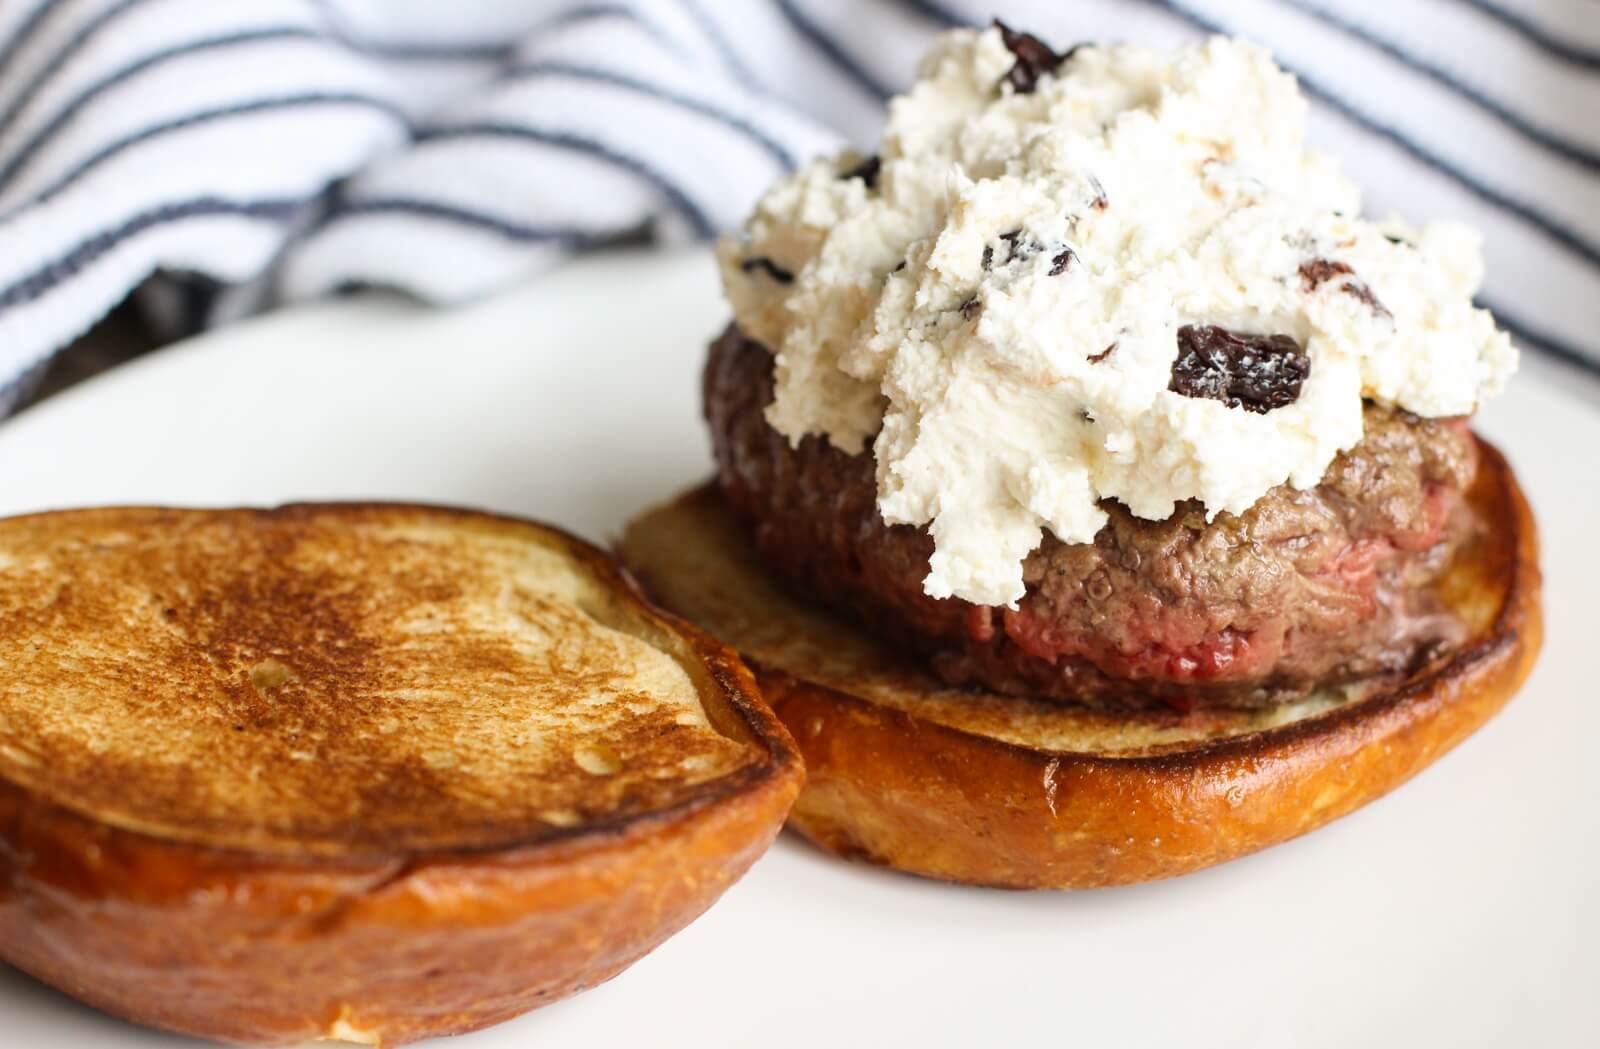 Goat Cheese Horseradish and Dried Cherry Topped Burgers - MEtirementblog